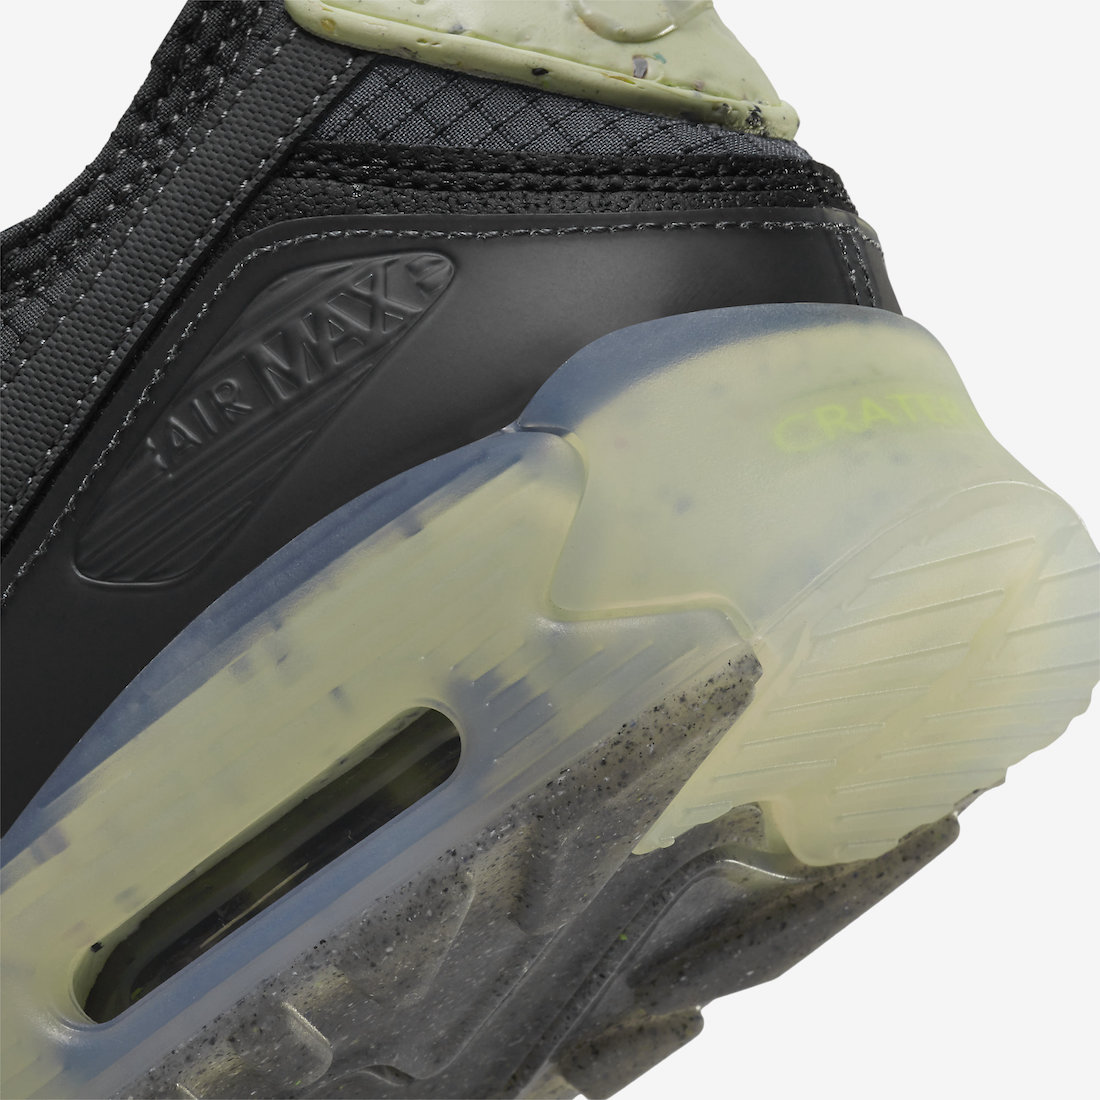 Nike-Air-Max-90-Terrascape-Anthracite-DH2973-001-Release-Date-7